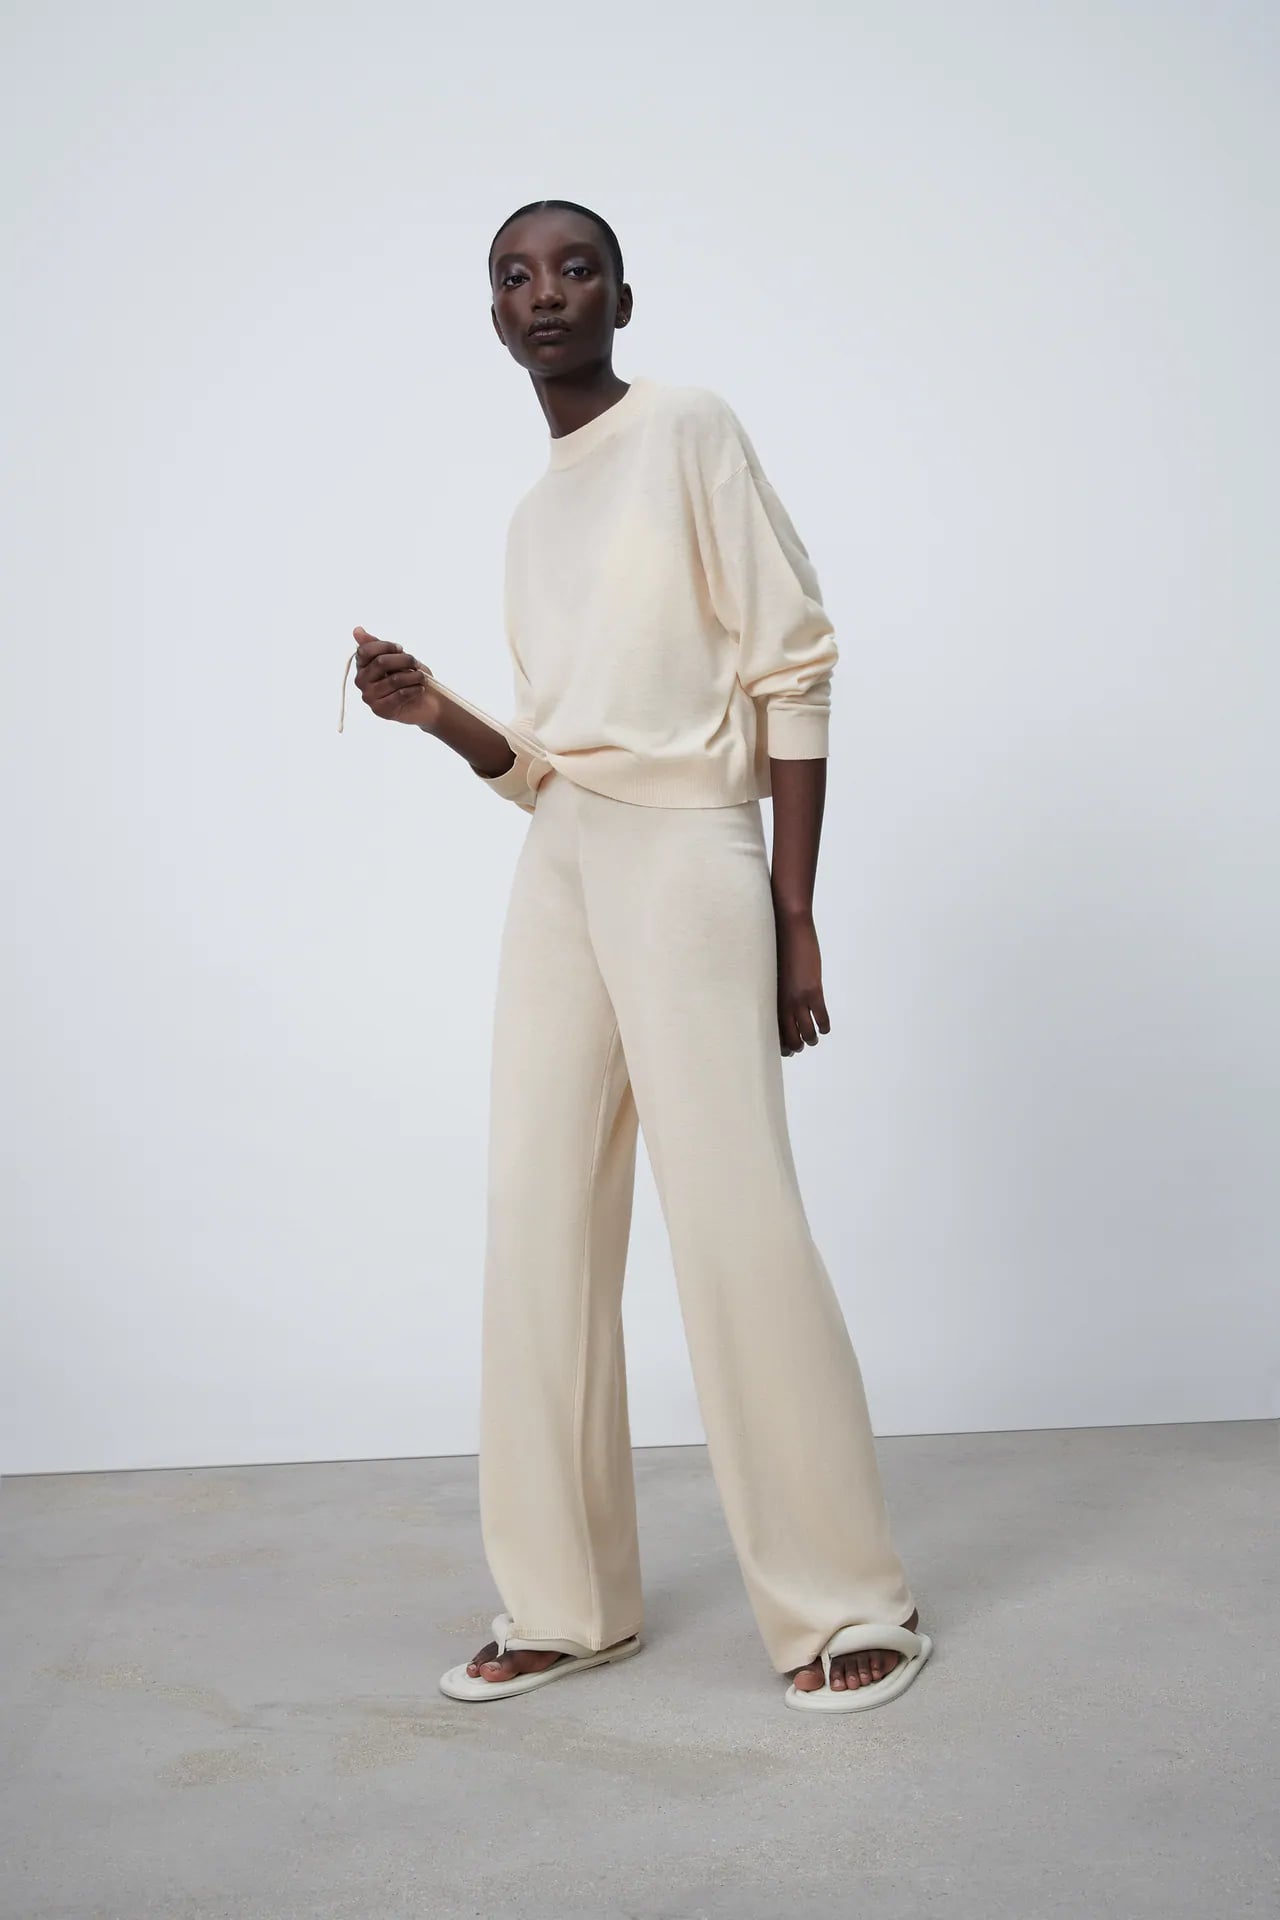 These Cute Lounge Pants From Zara Are So Easy To Dress Up For The